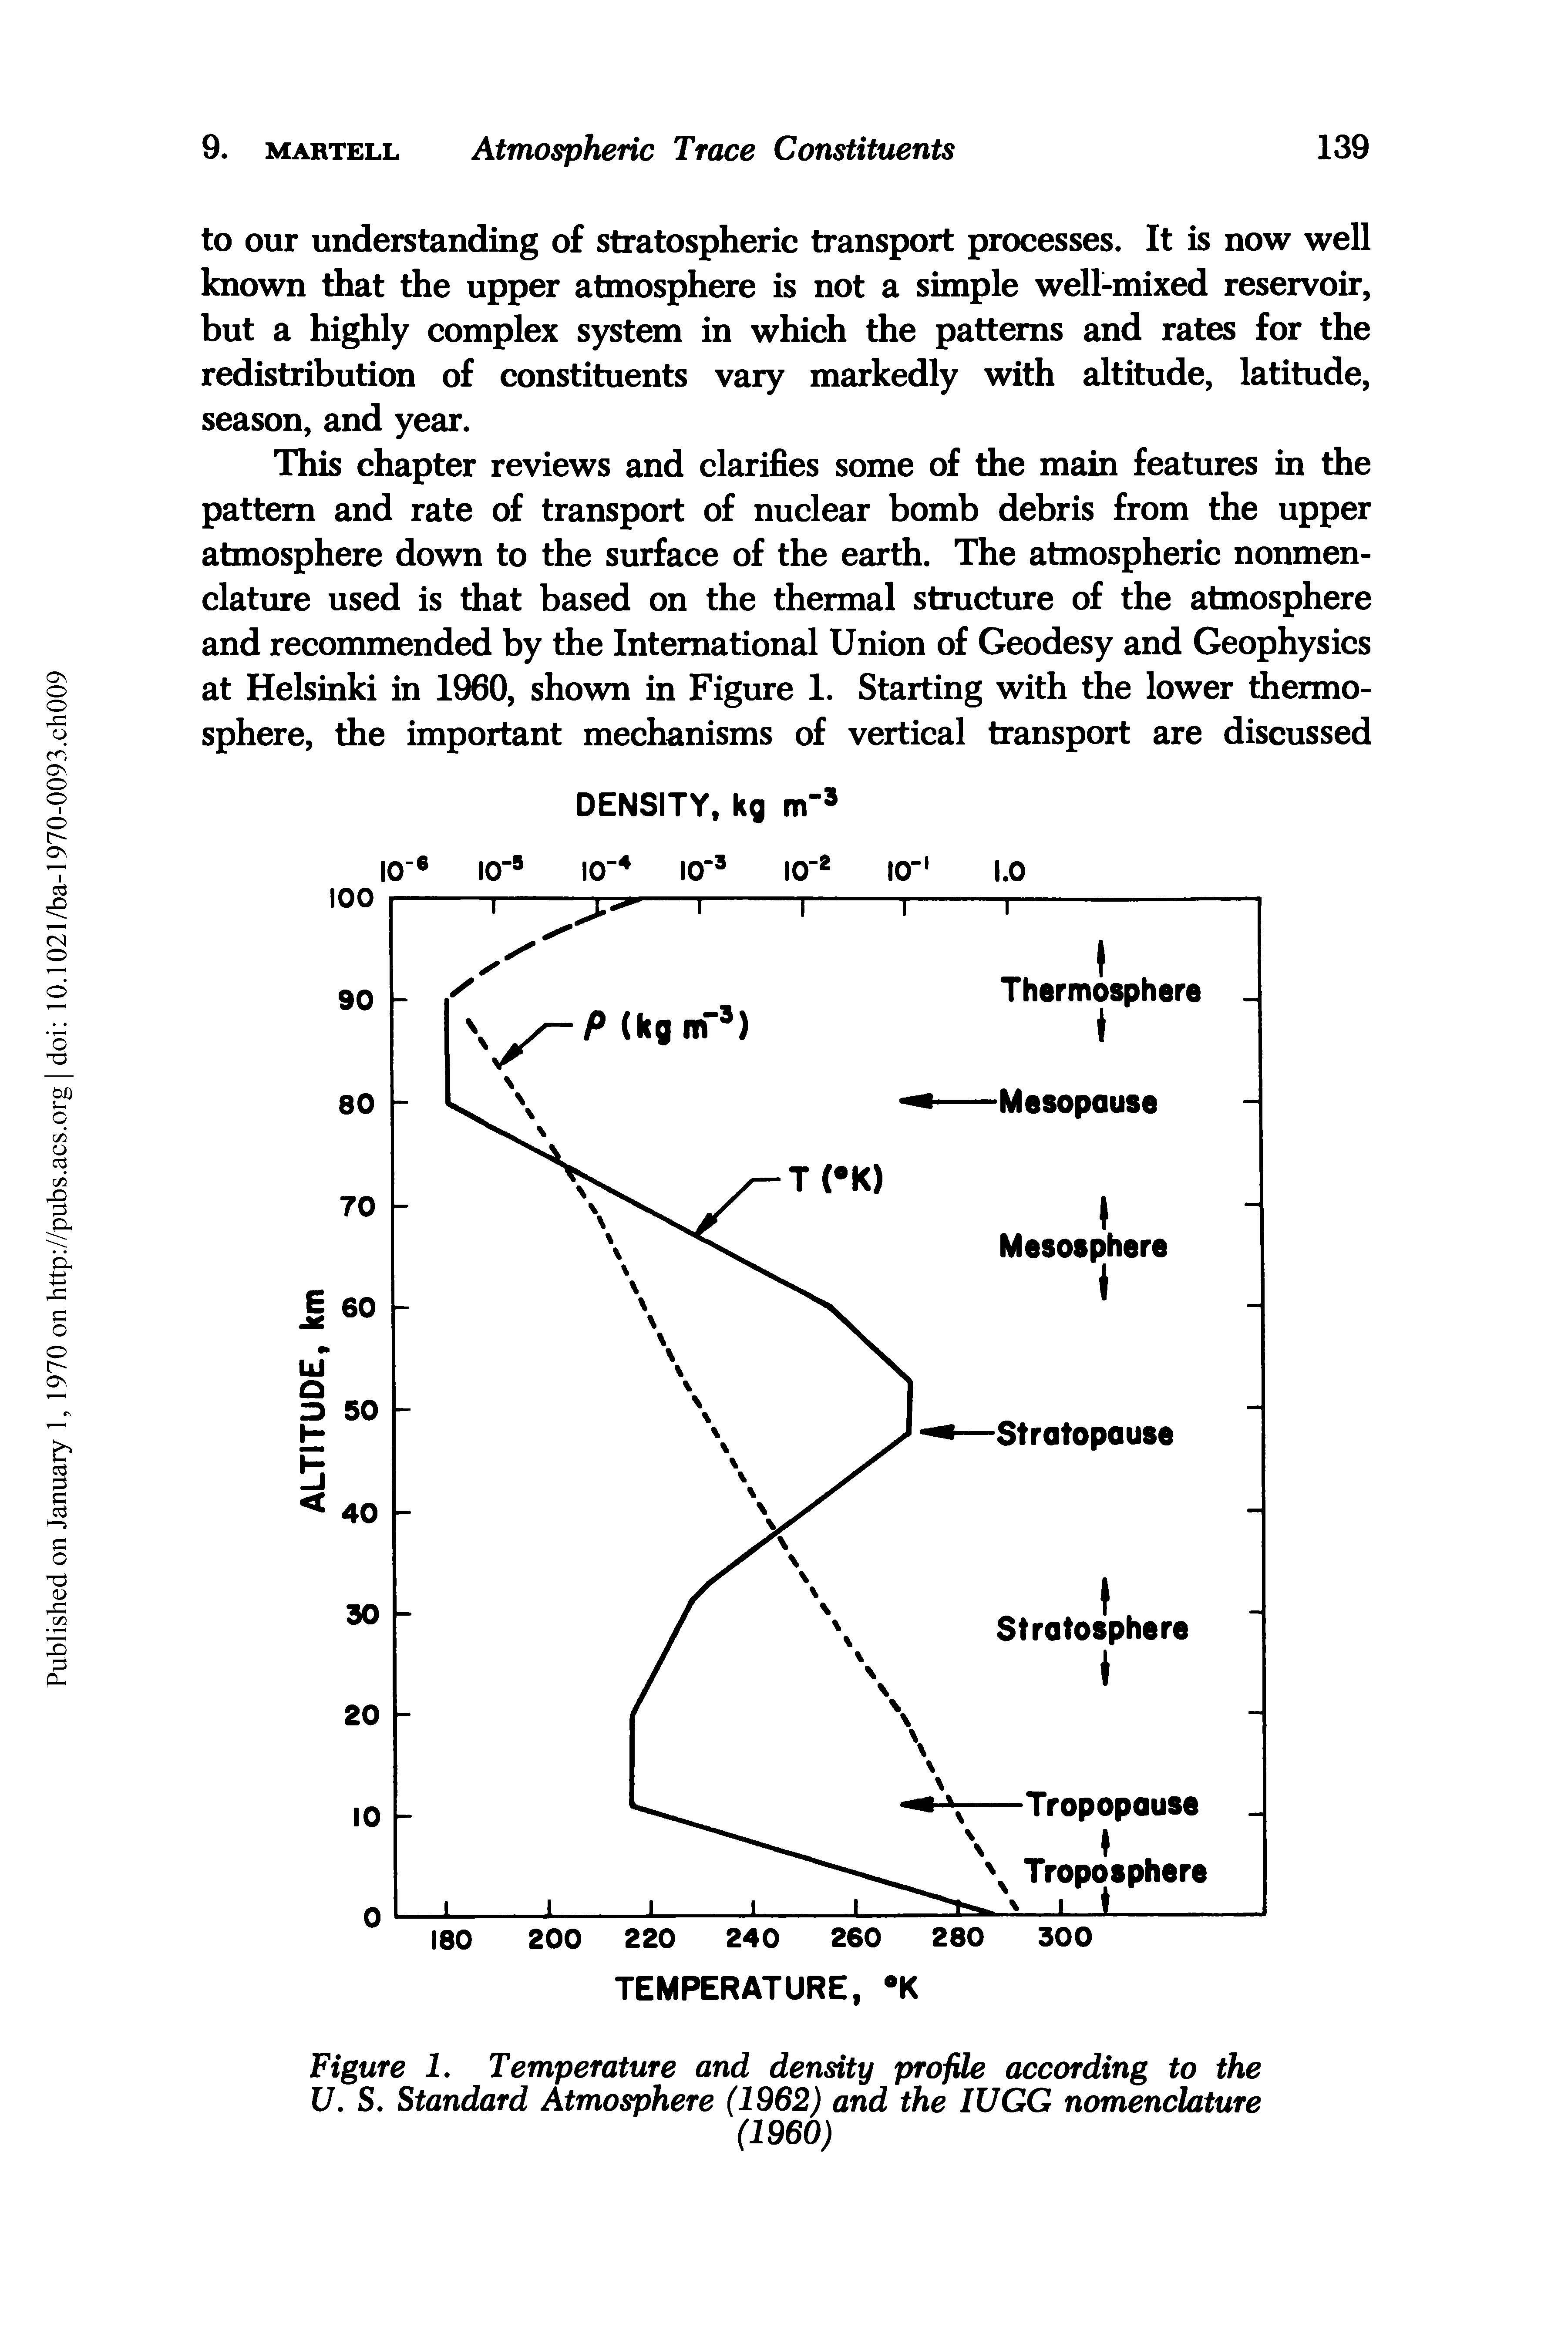 Figure 1. Temperature and density profile according to the U. S. Standard Atmosphere (1962) and the IUGG nomenclature...